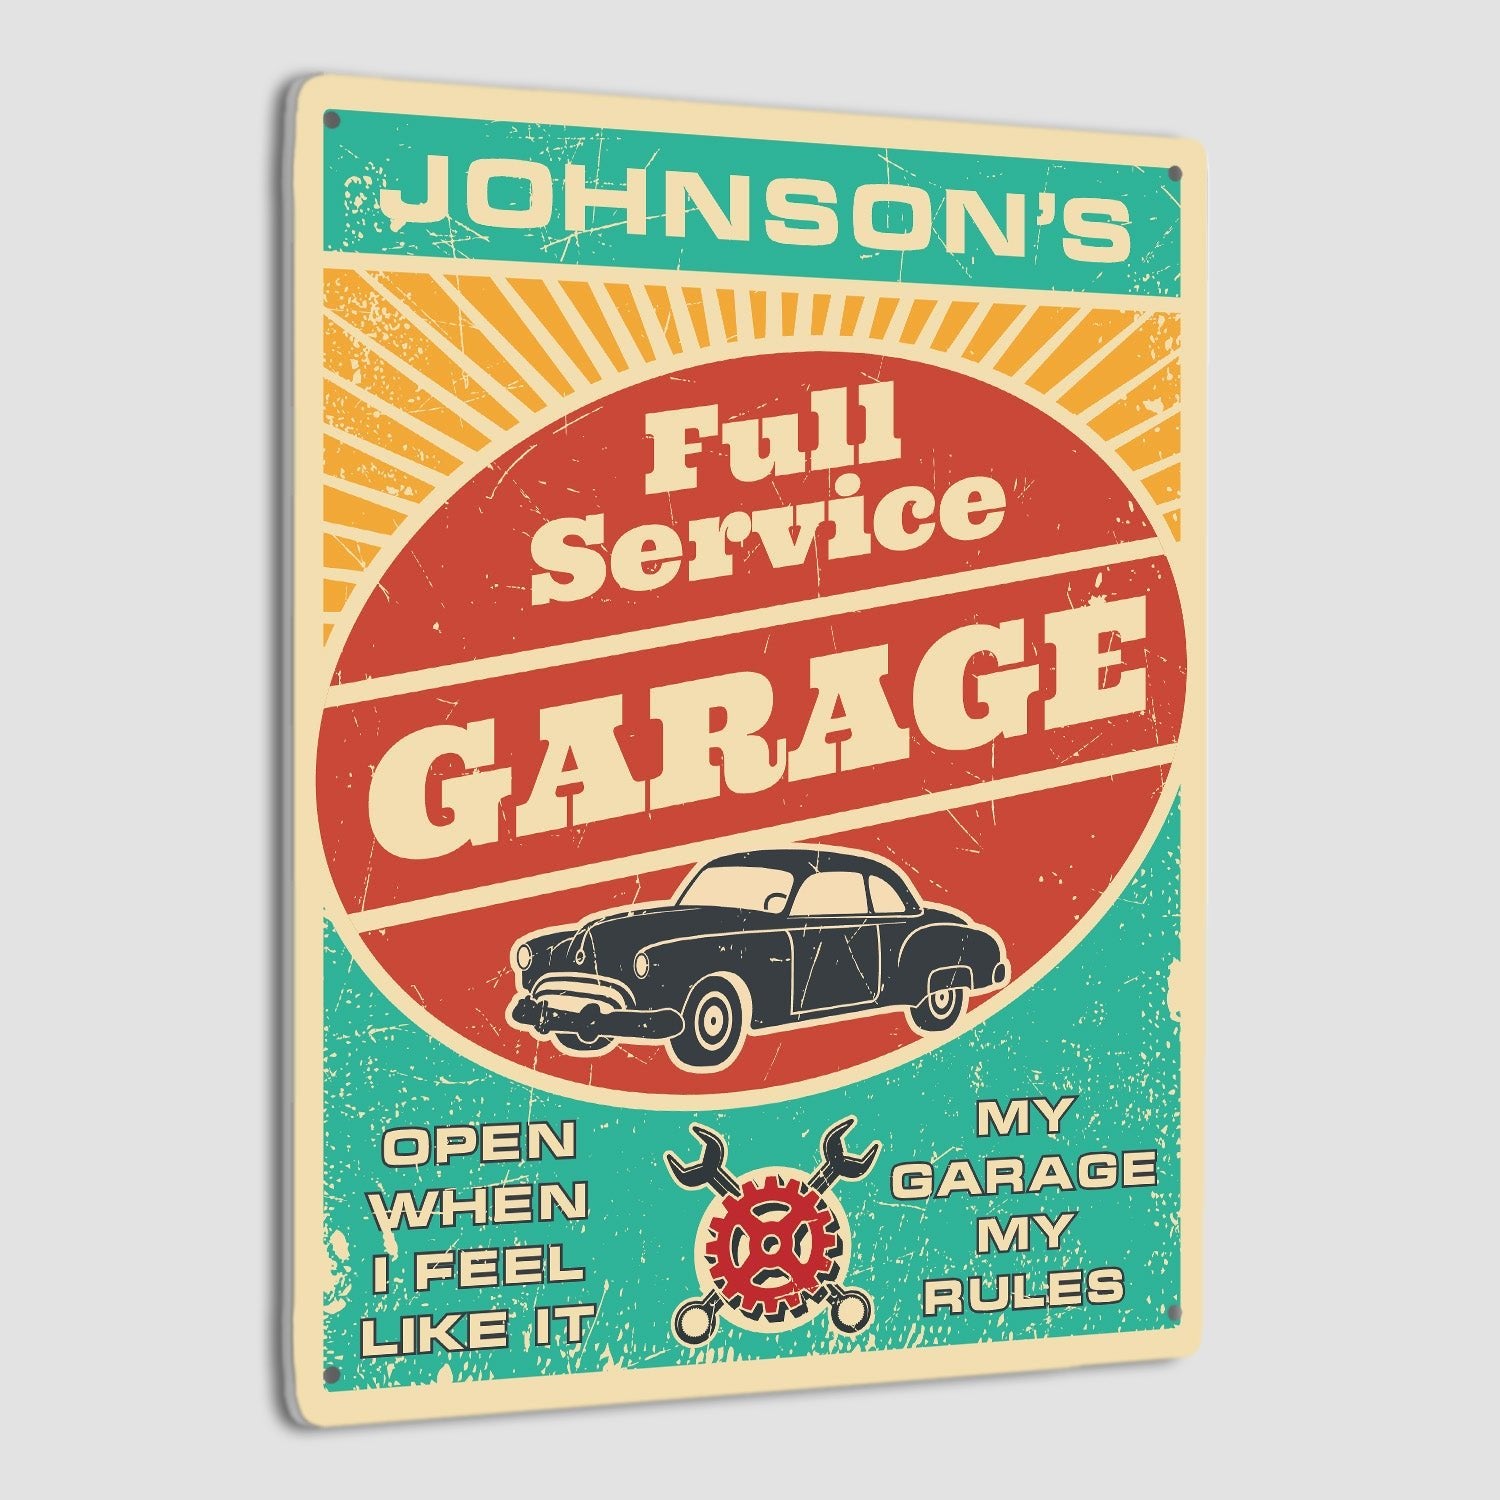 Custom Garage Signs, Personalized Name, Full Service Open When I Feel Like It